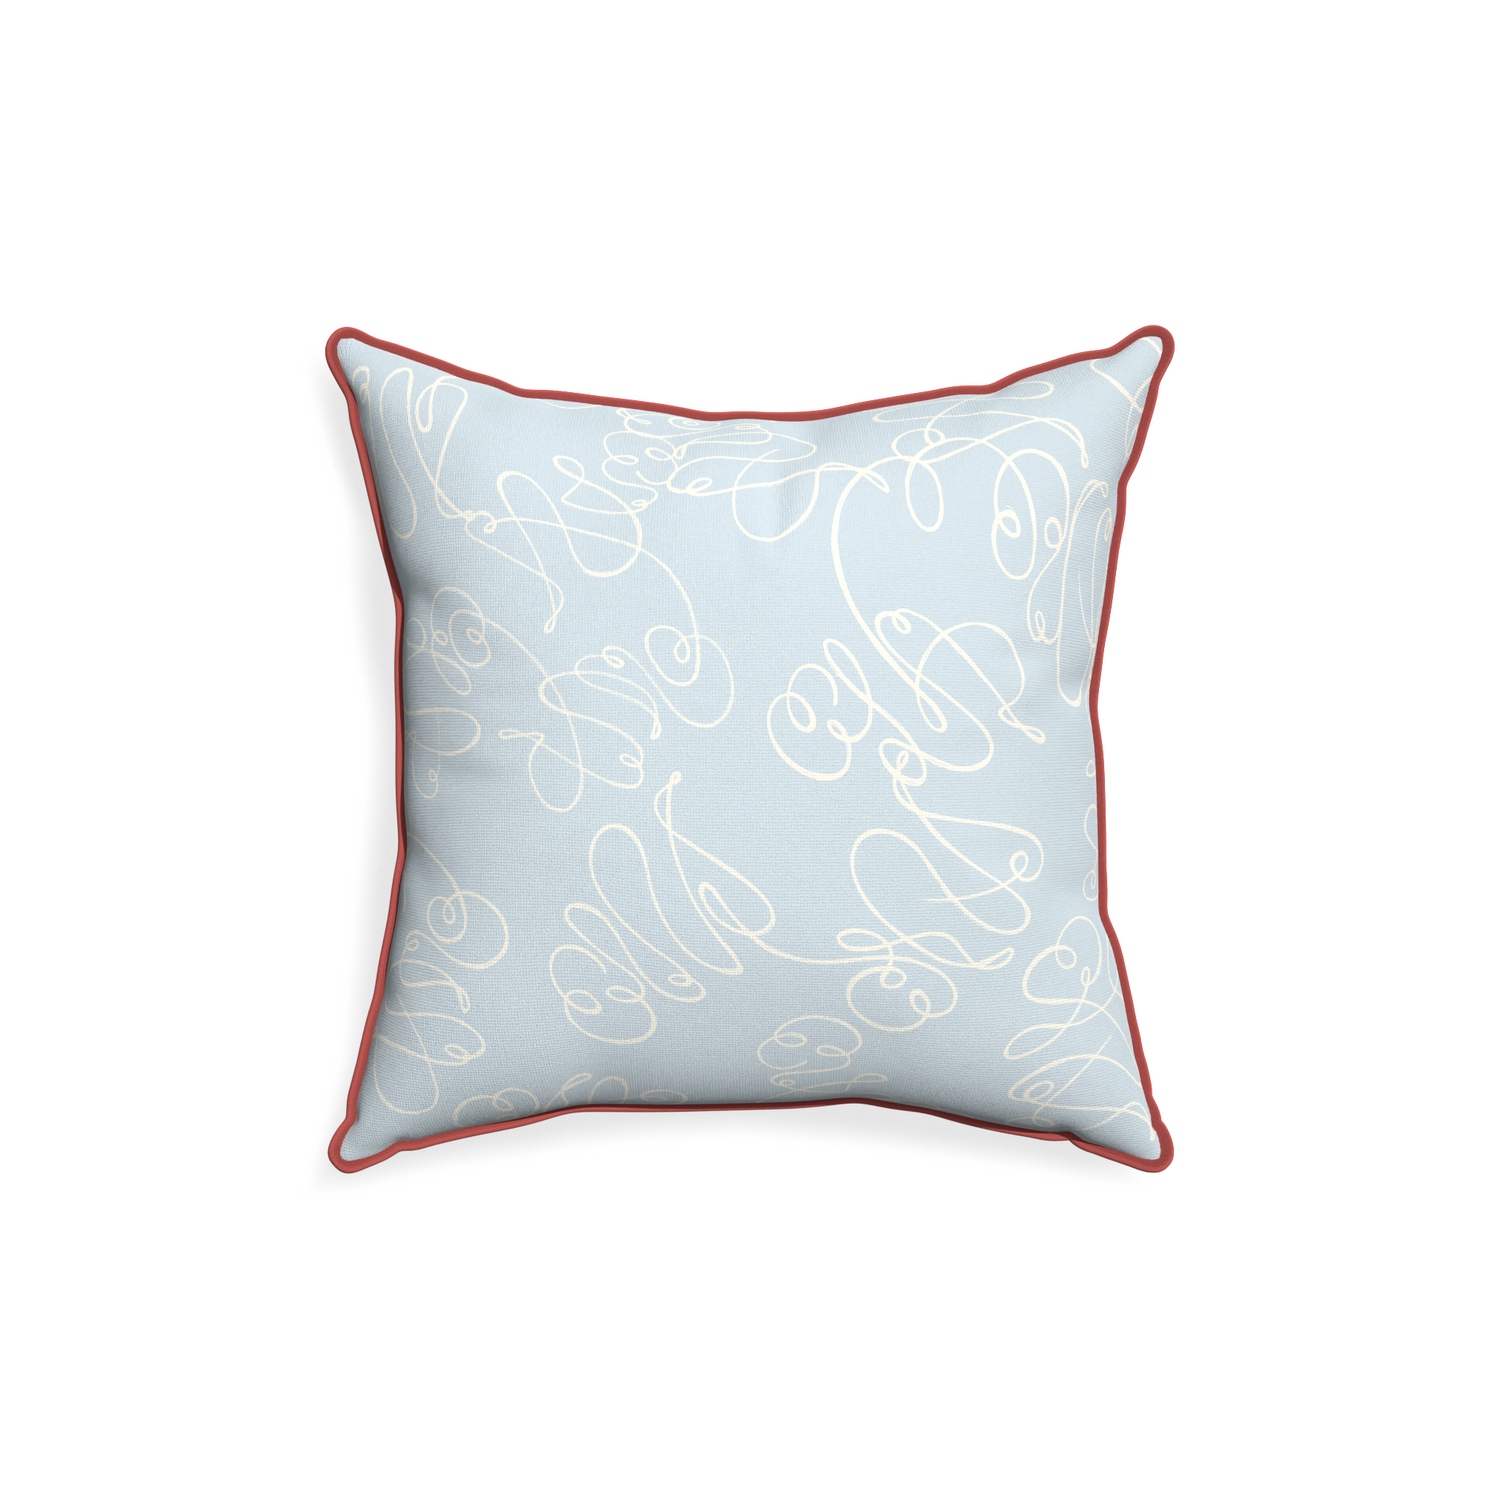 18-square mirabella custom pillow with c piping on white background